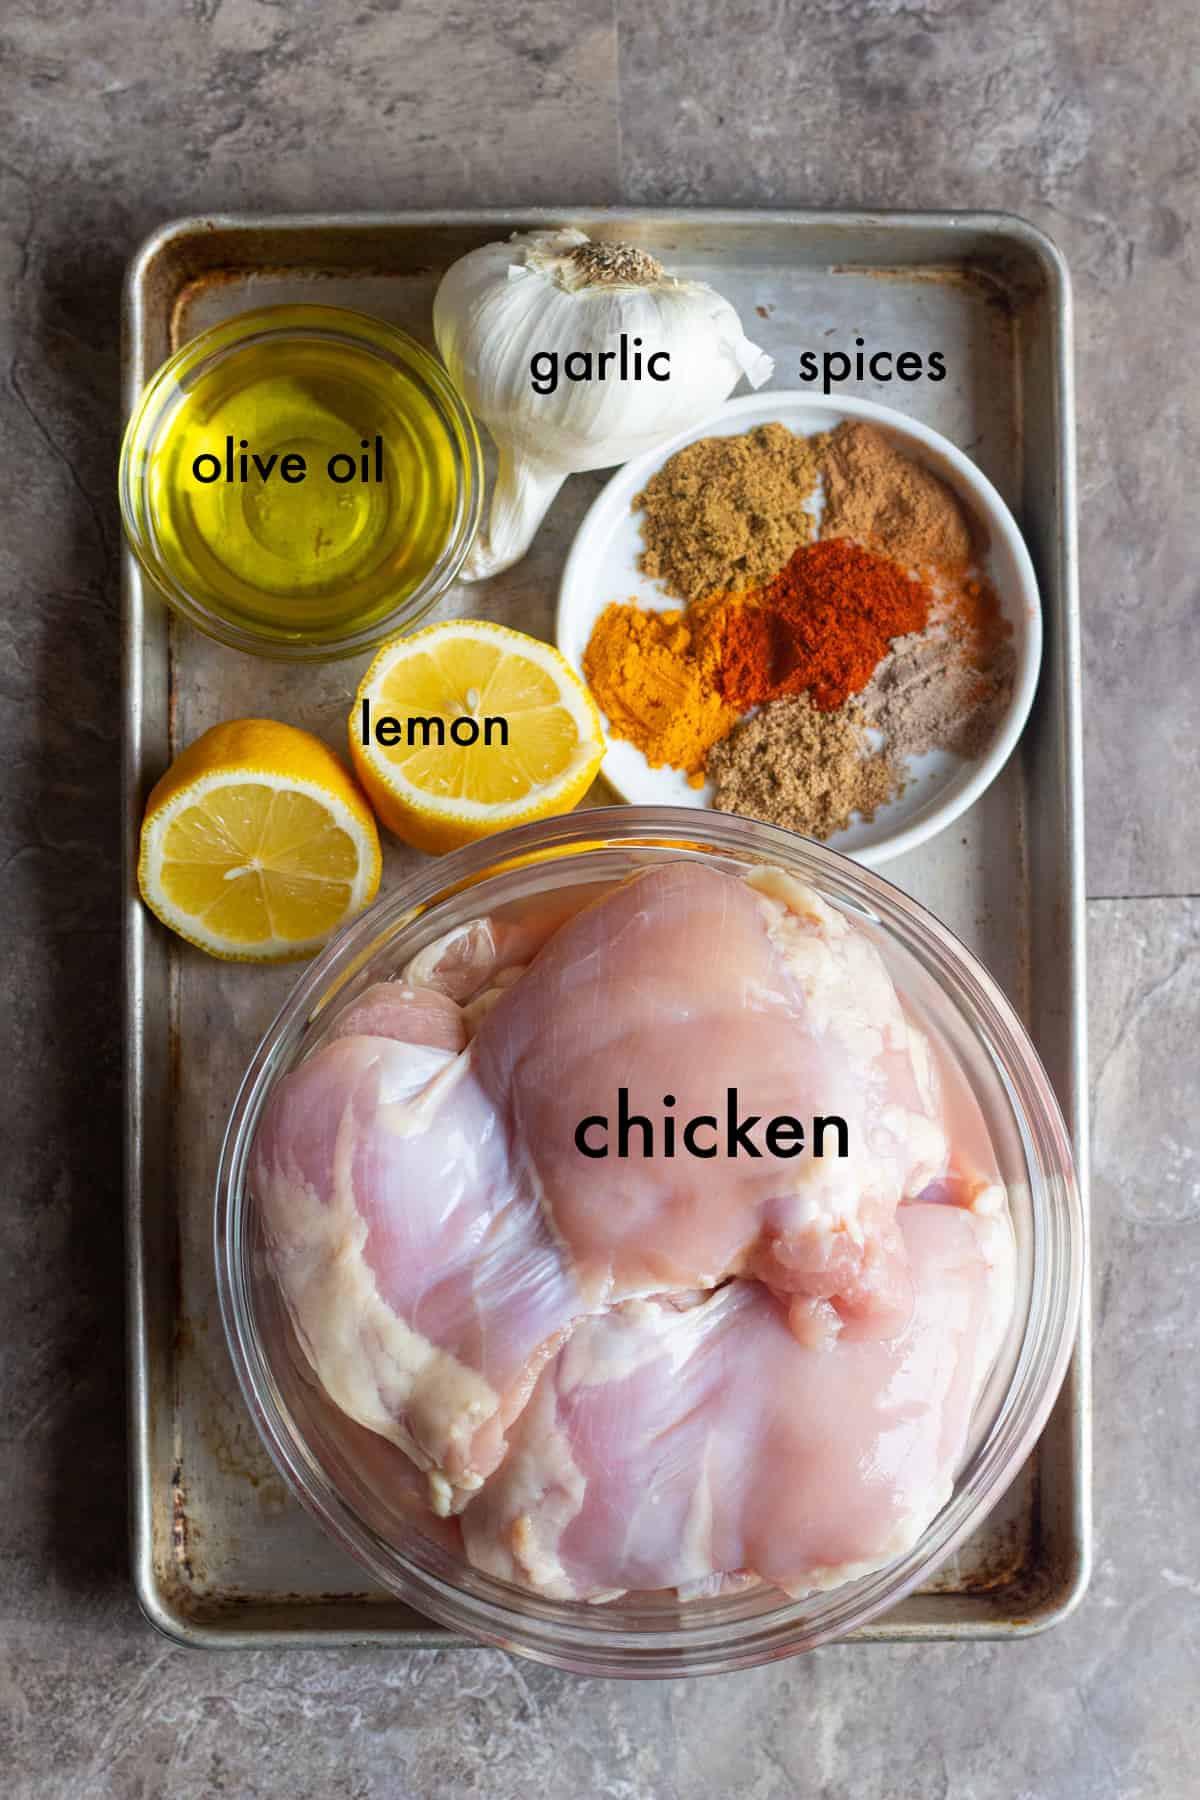 To make this recipe you need chicken thighs, a mix of spices, lemon and garlic.